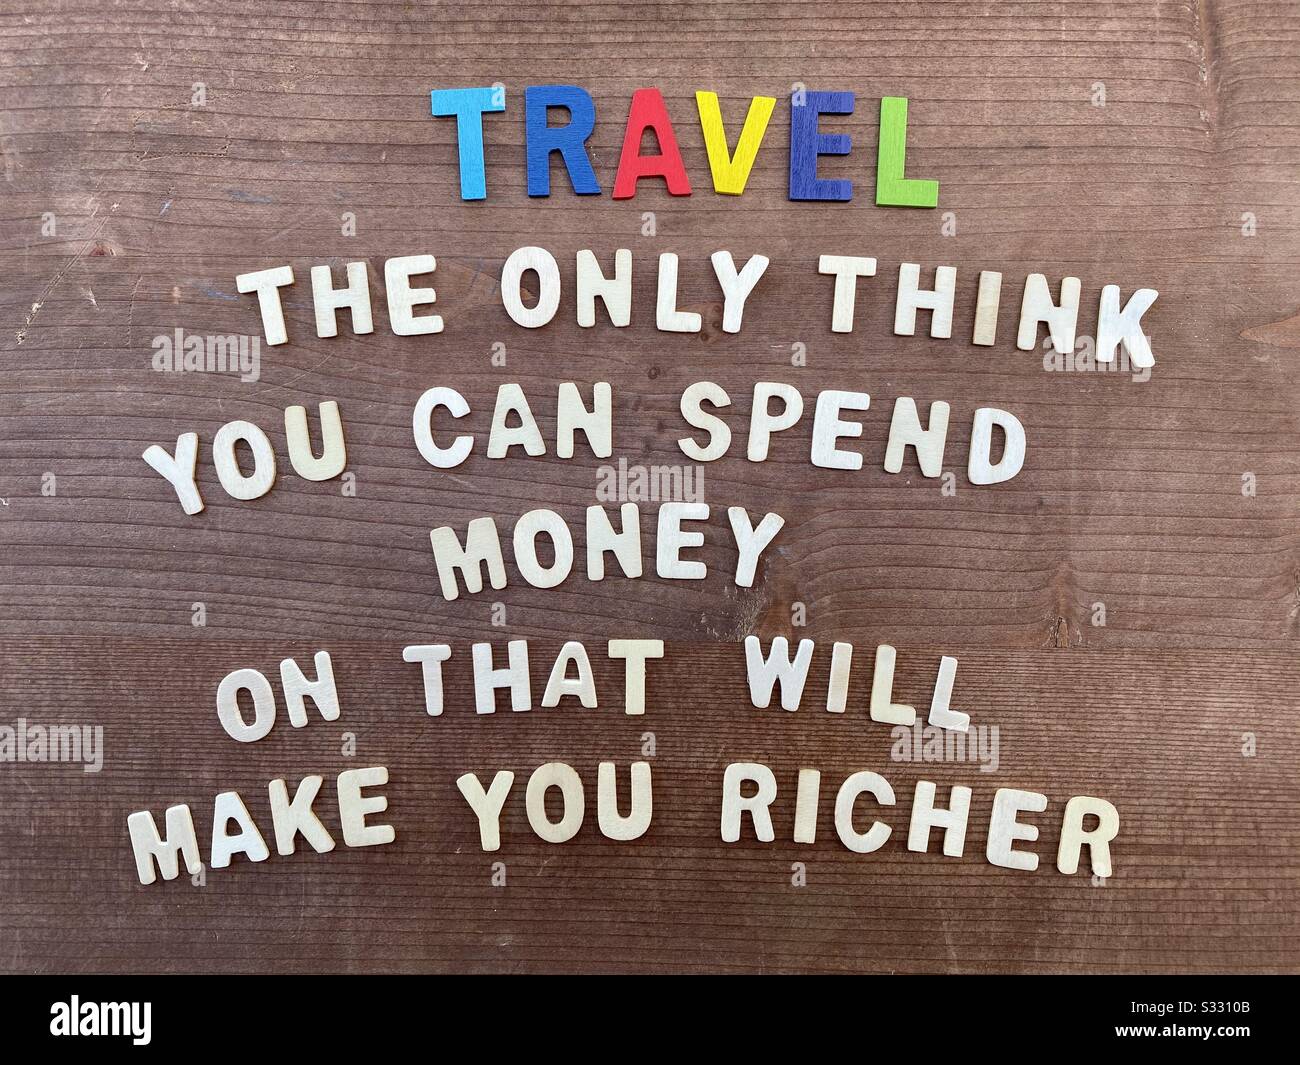 Travel, the only think you can spend money on that will make you richer Stock Photo